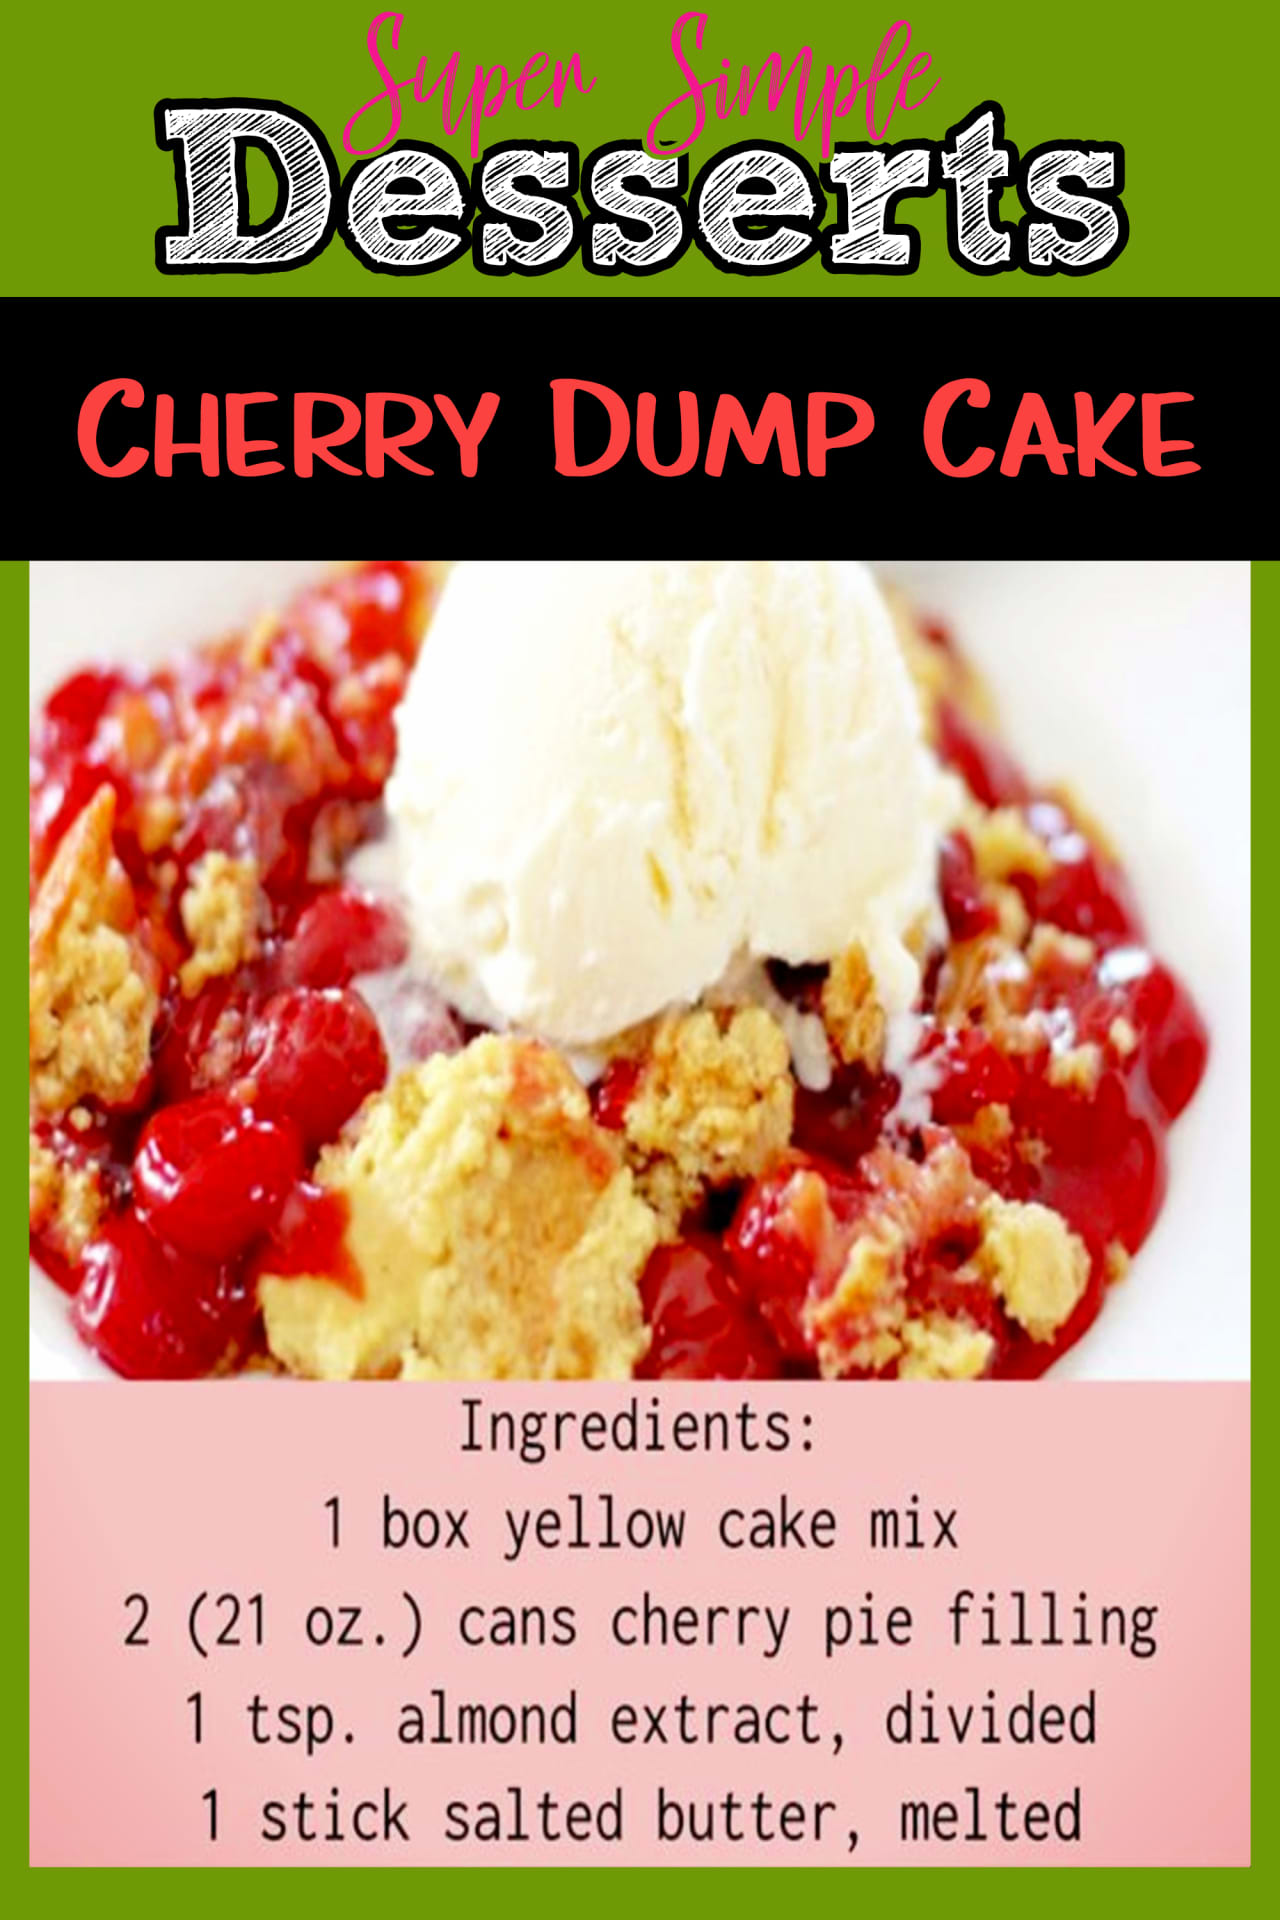 super simple desserts ideas recipes - easy dump cakes to make for a crowd - 3 ingredient cherry dump cake with cake mix and pie filling